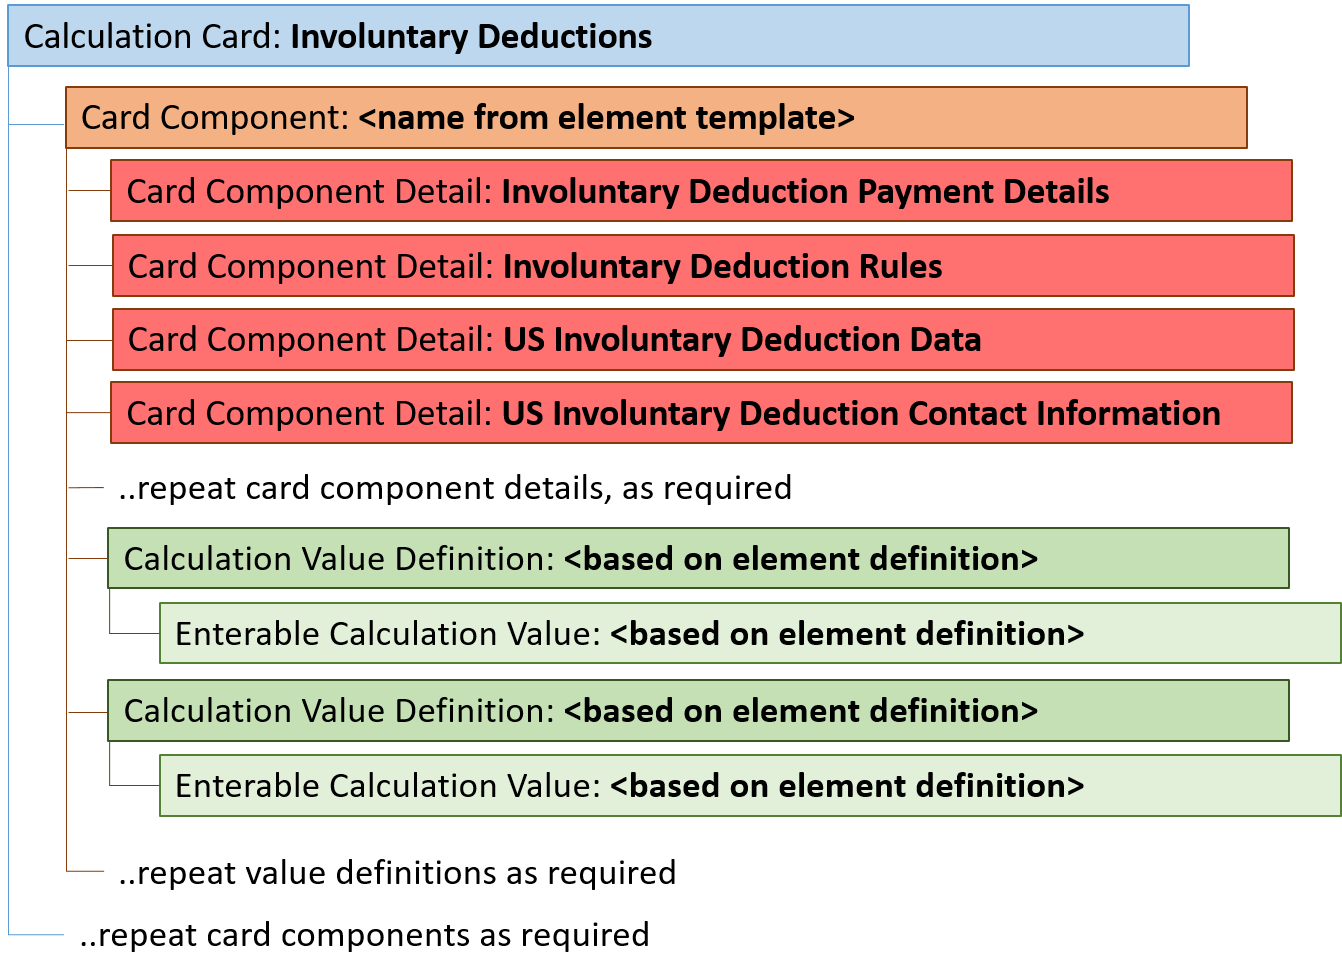 The general card component hierarchy for an Involuntary Deduction: